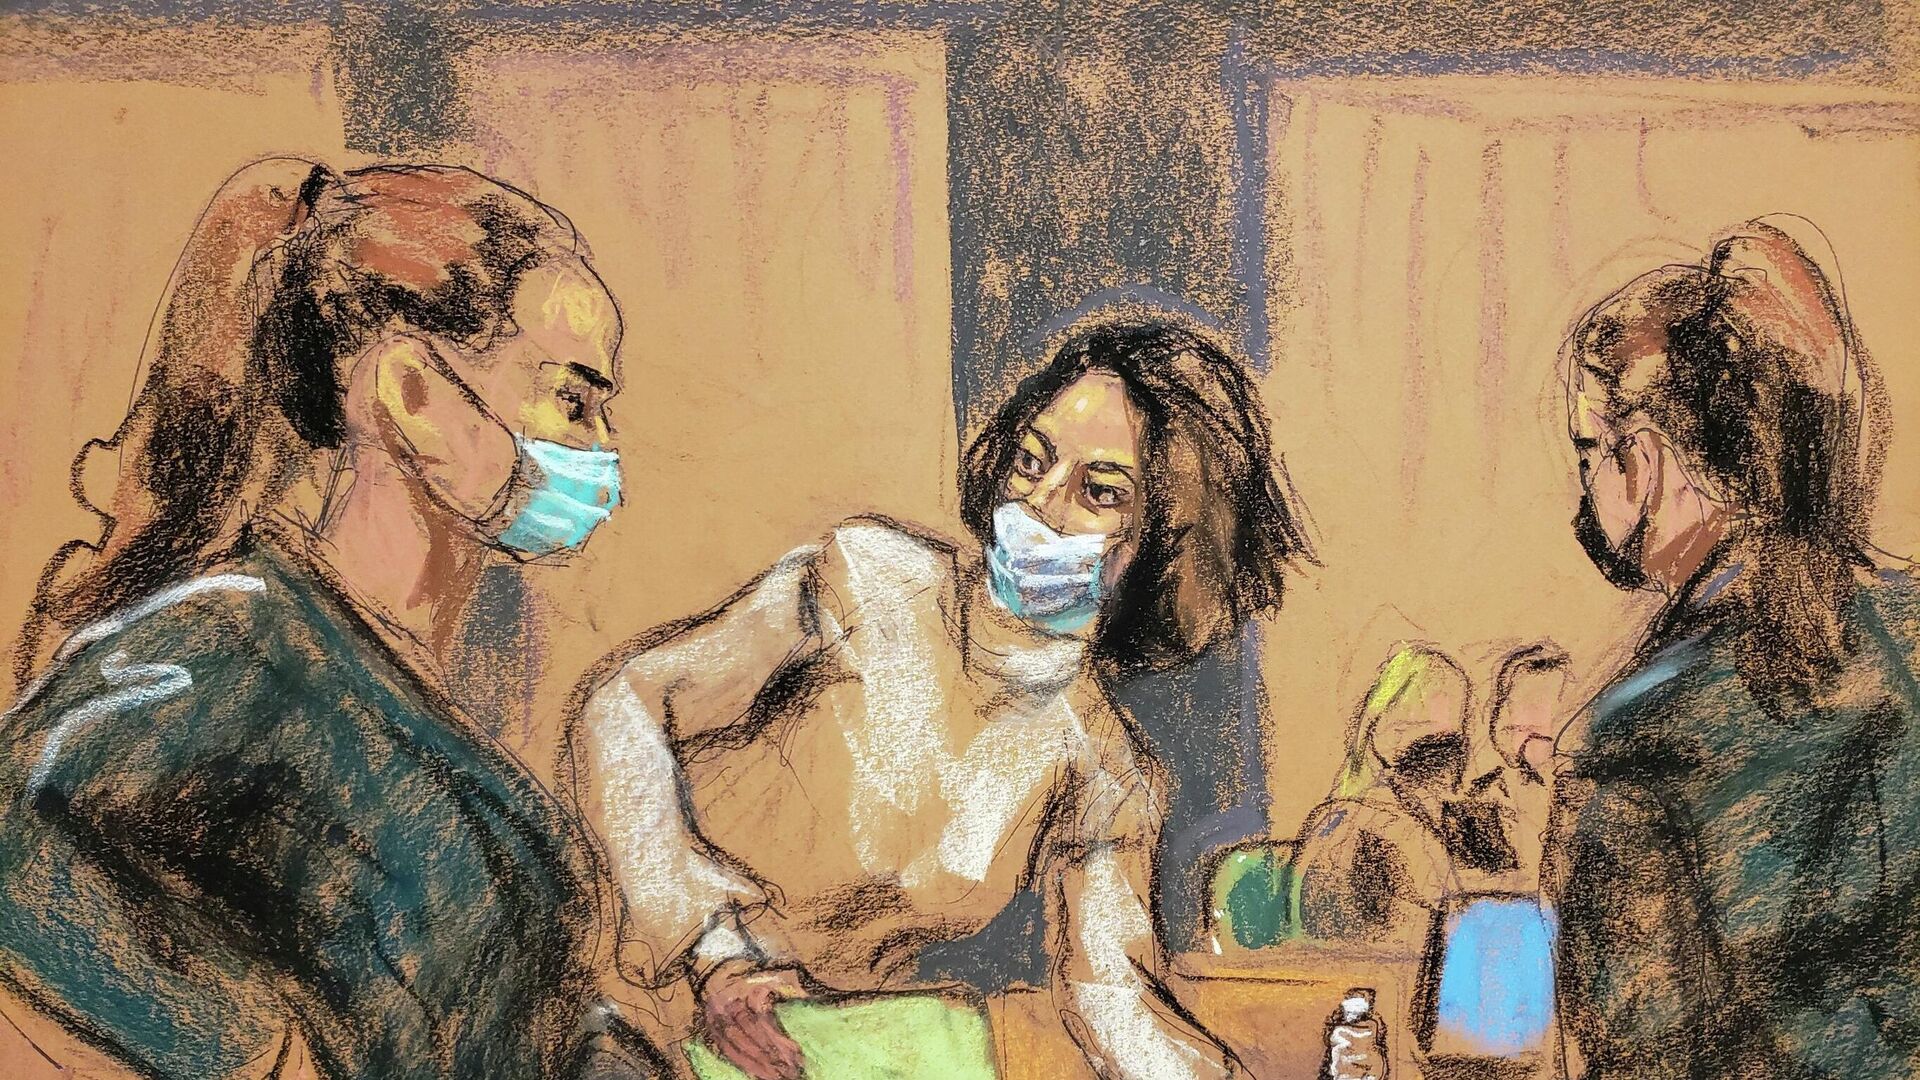 Ghislaine Maxwell, the Jeffrey Epstein associate accused of sex trafficking, enters the court with U.S. court marshalls during her trial in a courtroom sketch in New York City, U.S., December 3, 2021 - Sputnik International, 1920, 06.12.2021